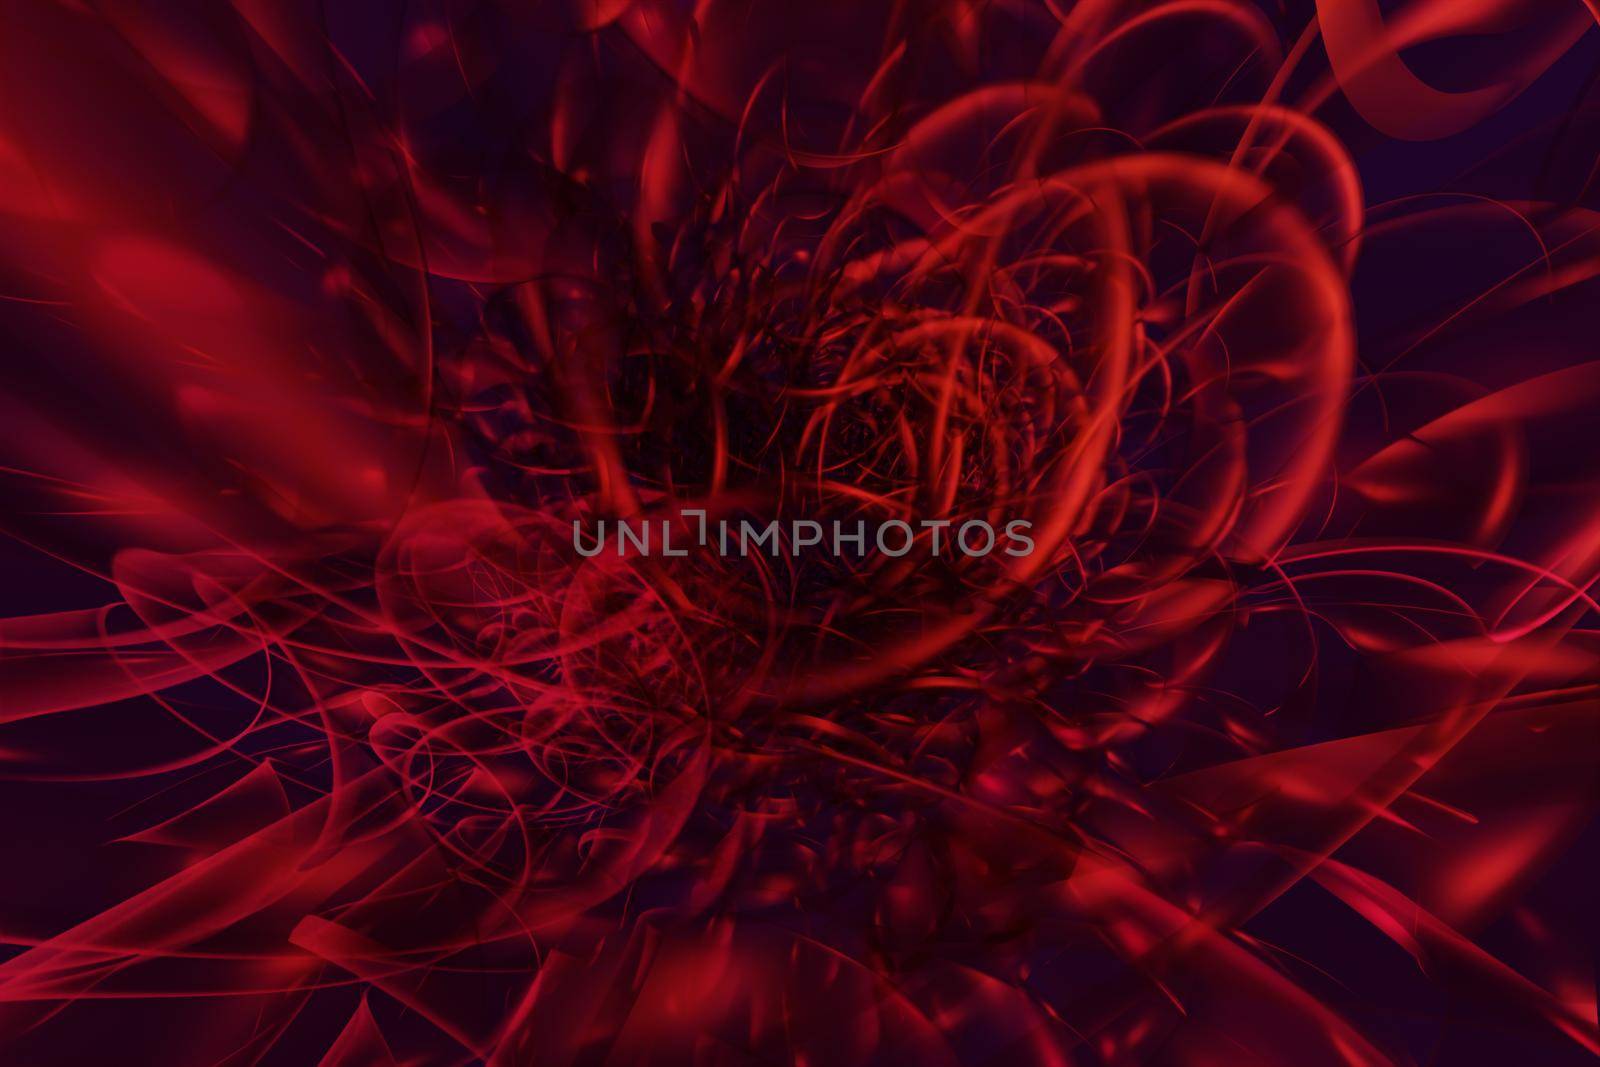 3d illustration of an abstract colorful red background with spirals, lines and geometric patterns